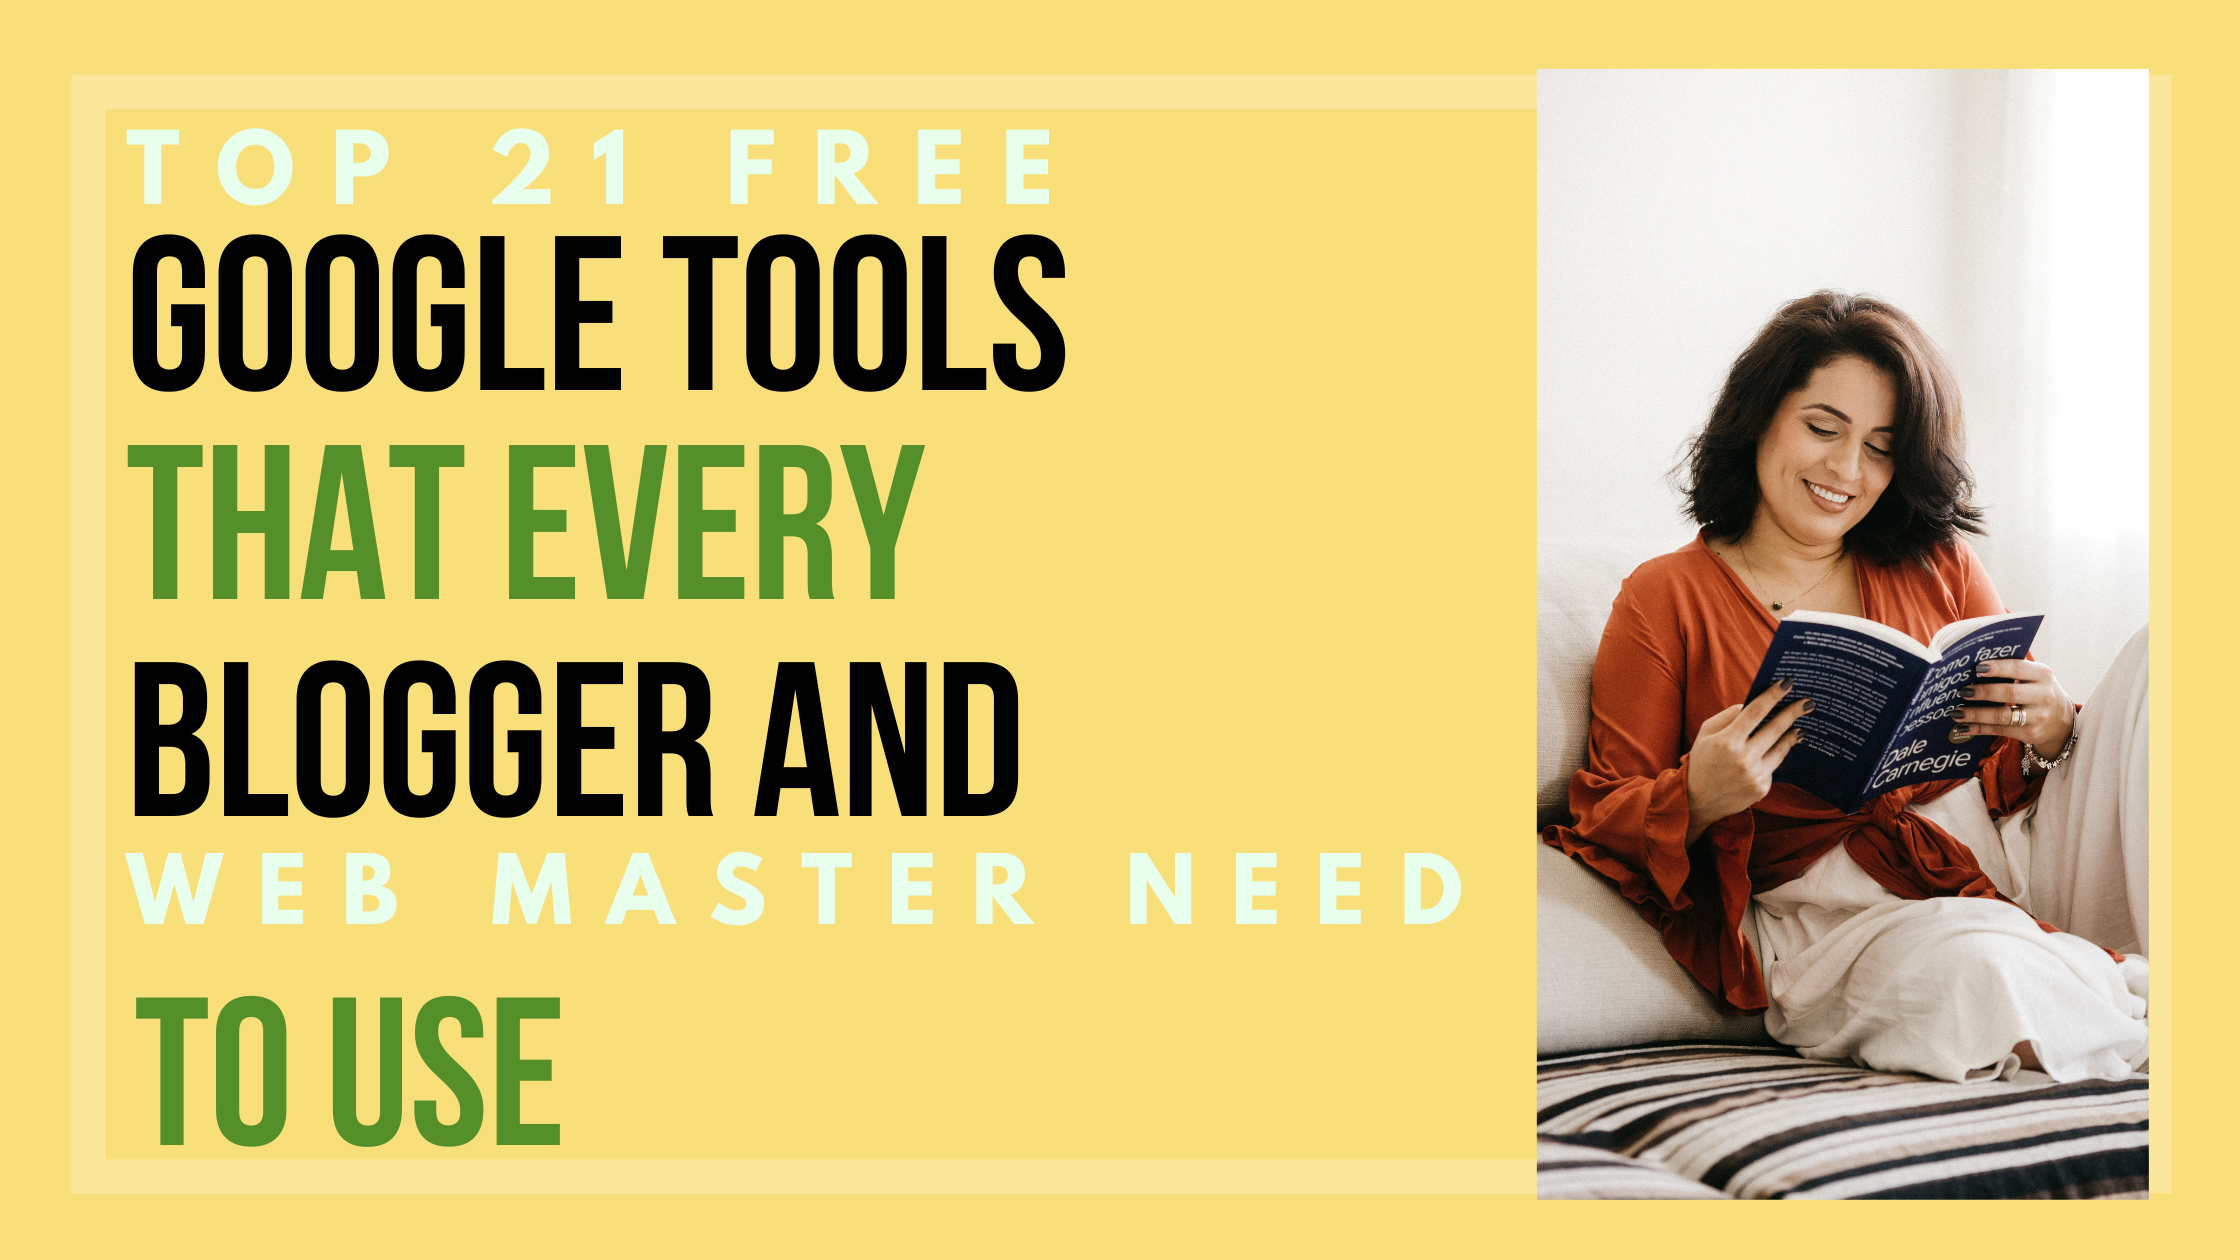 Top 21 free Google tools that every blogger and web master should use